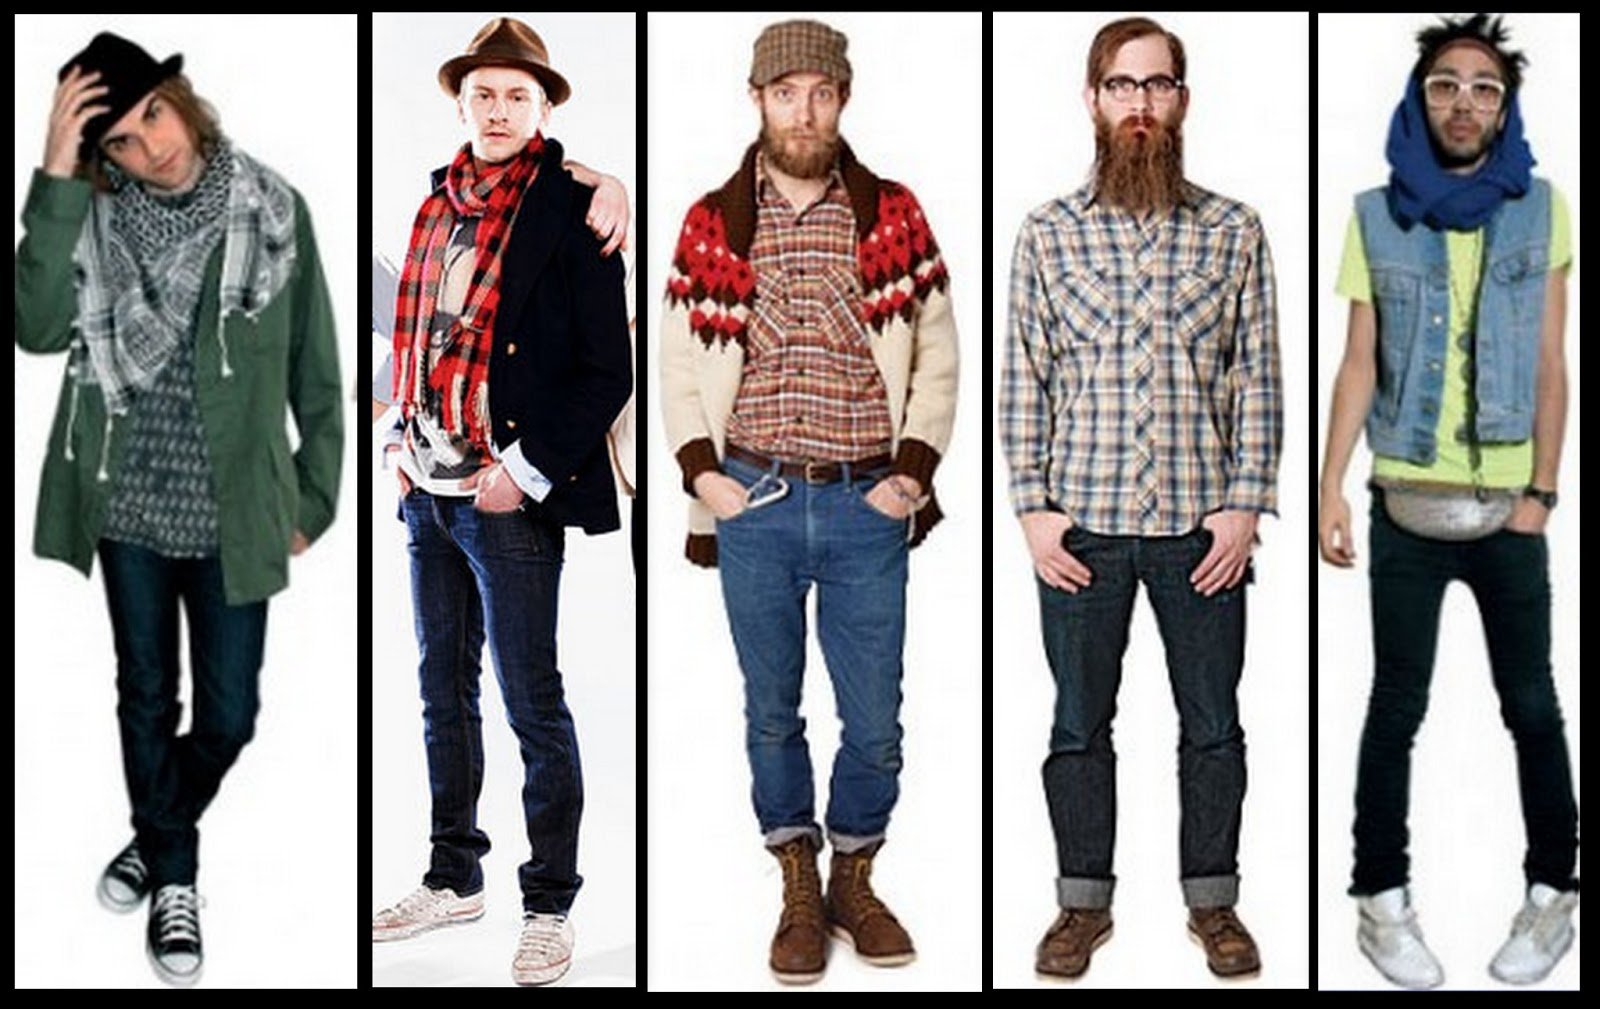 Tribus urbanas de ayer y hoy: Hipsters made in Chile